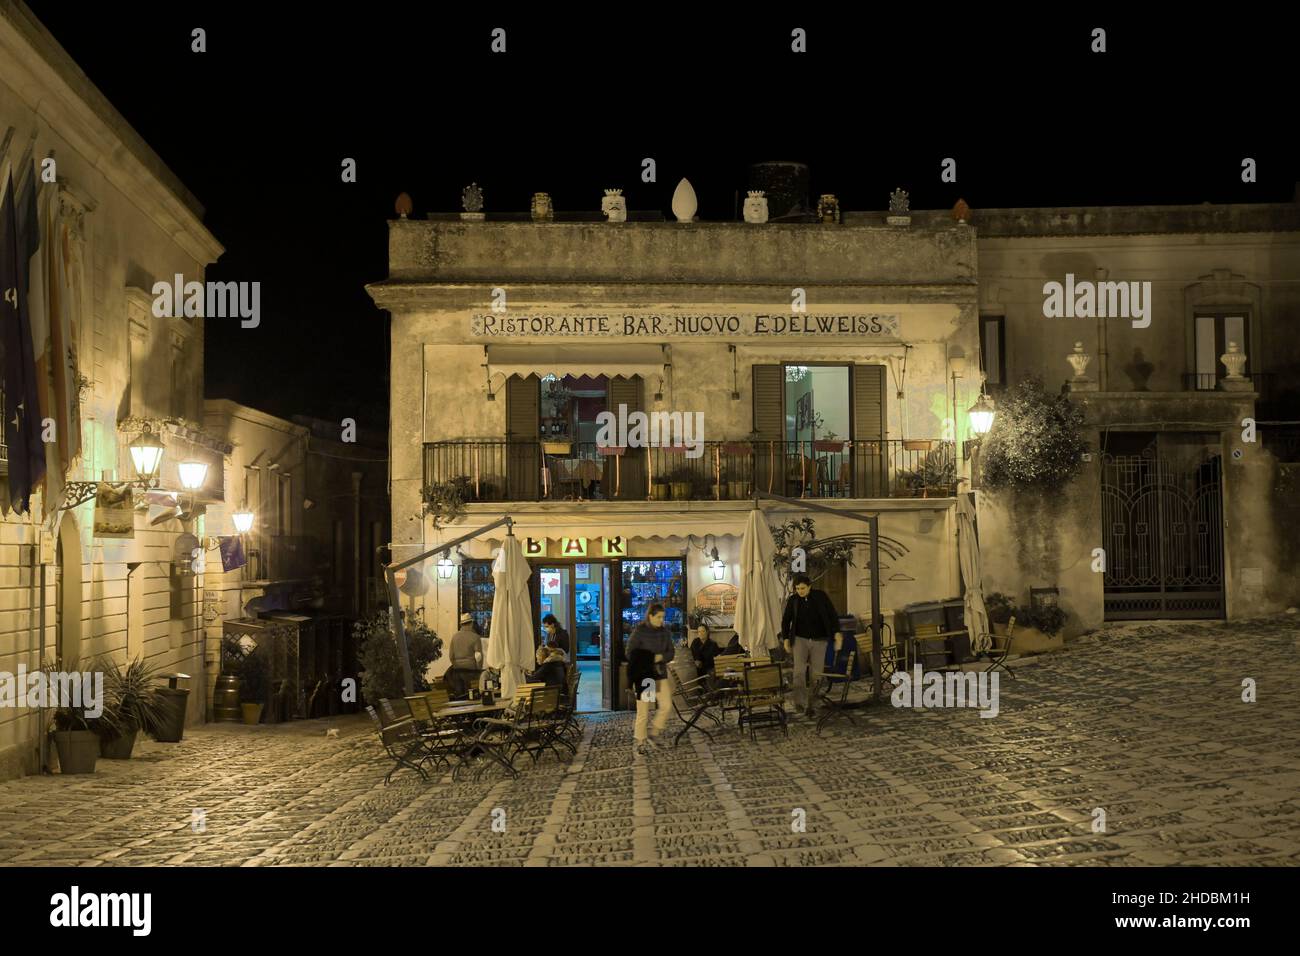 Restaurant Nuovo Edelweiss, Piazza Della Loggia, Erice, Sizilien, Italien Banque D'Images